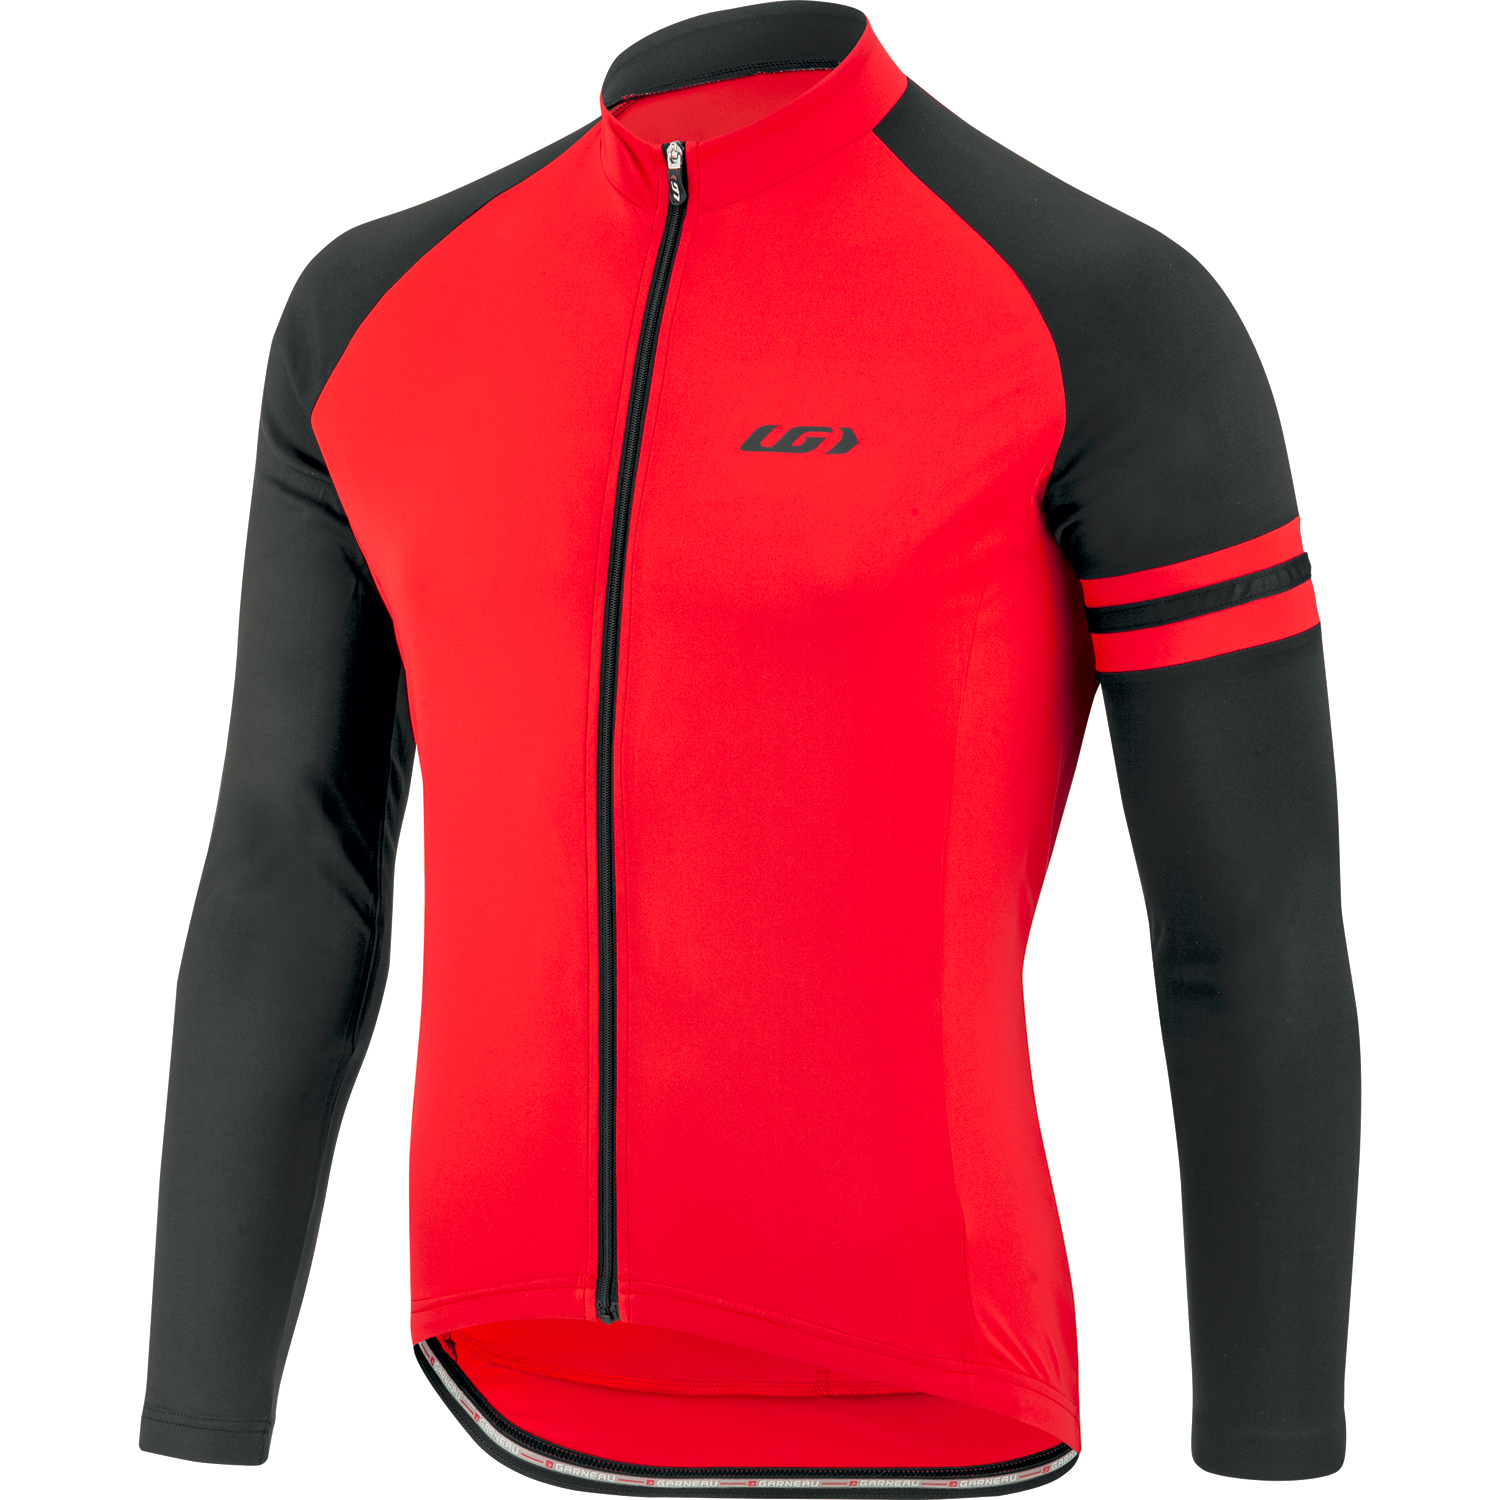 Garneau Evans Classic Long Sleeve Cycling Jersey - Cyclesport Bike Shop in  Park Ridge, Ridgewood, Westwood, Saddle River, New City, Nyack and Bergen  County.